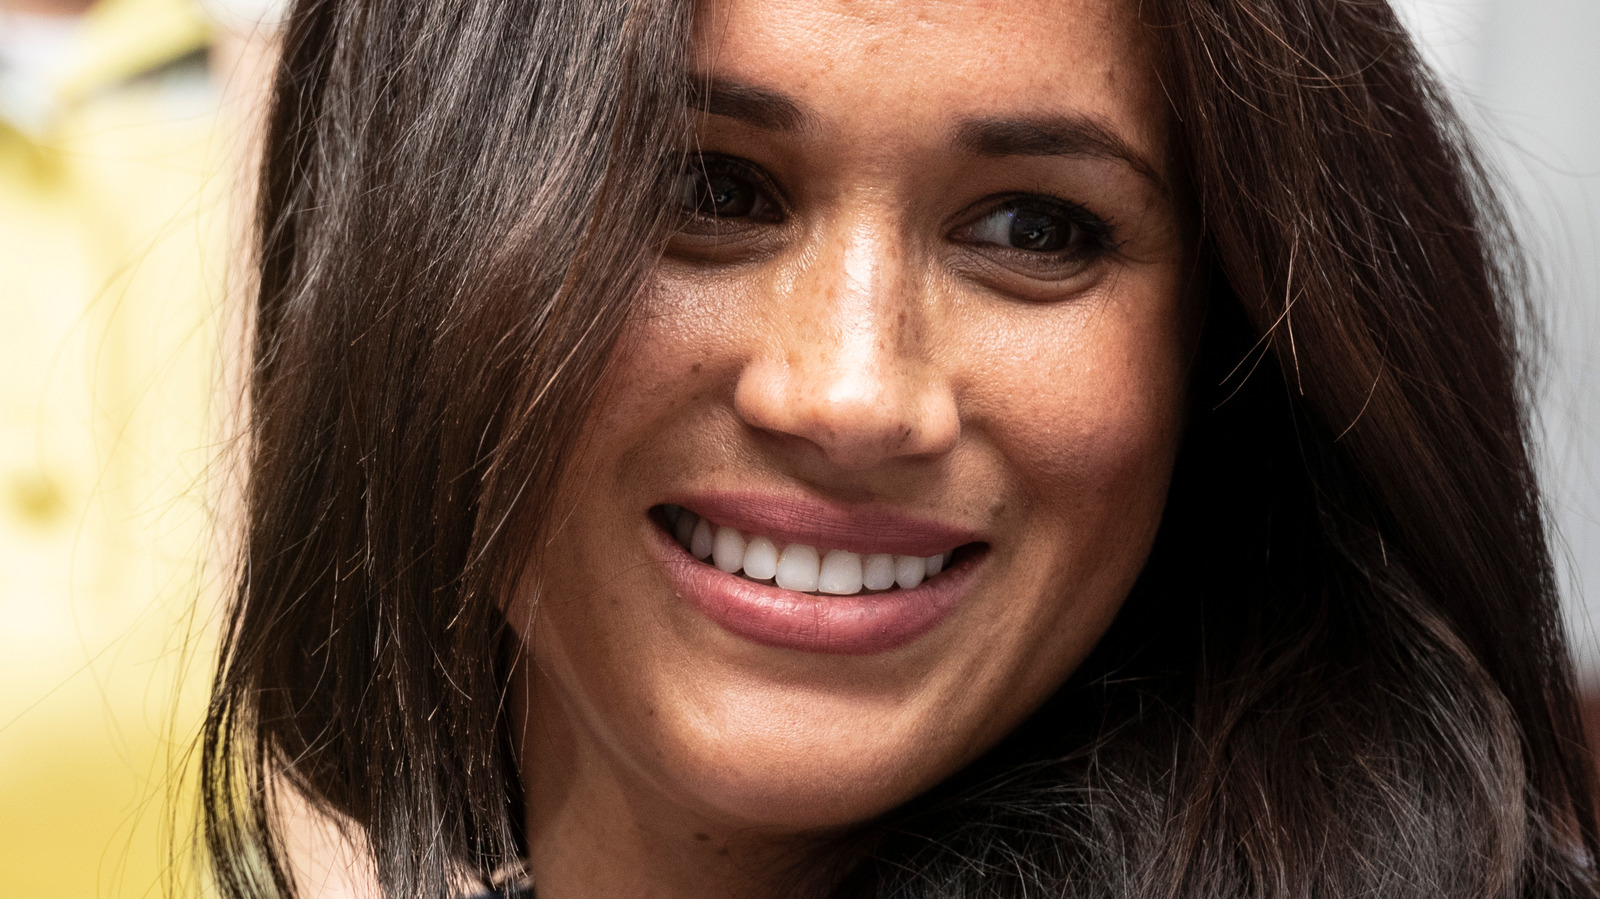 Meghan Markle Has Just Been Given A New Royal Nickname